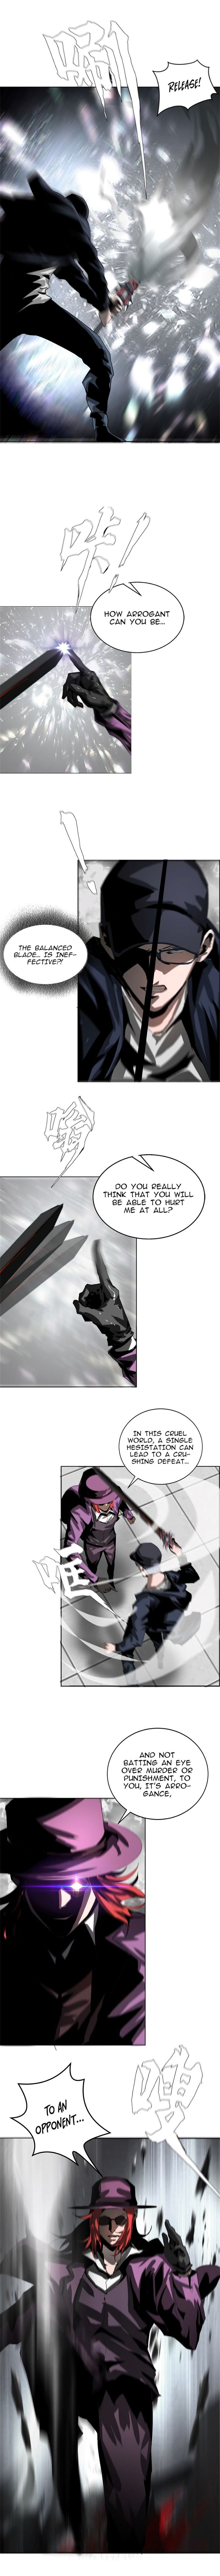 The Blade Of Evolution-Walking Alone In The Dungeon Chapter 20 page 8